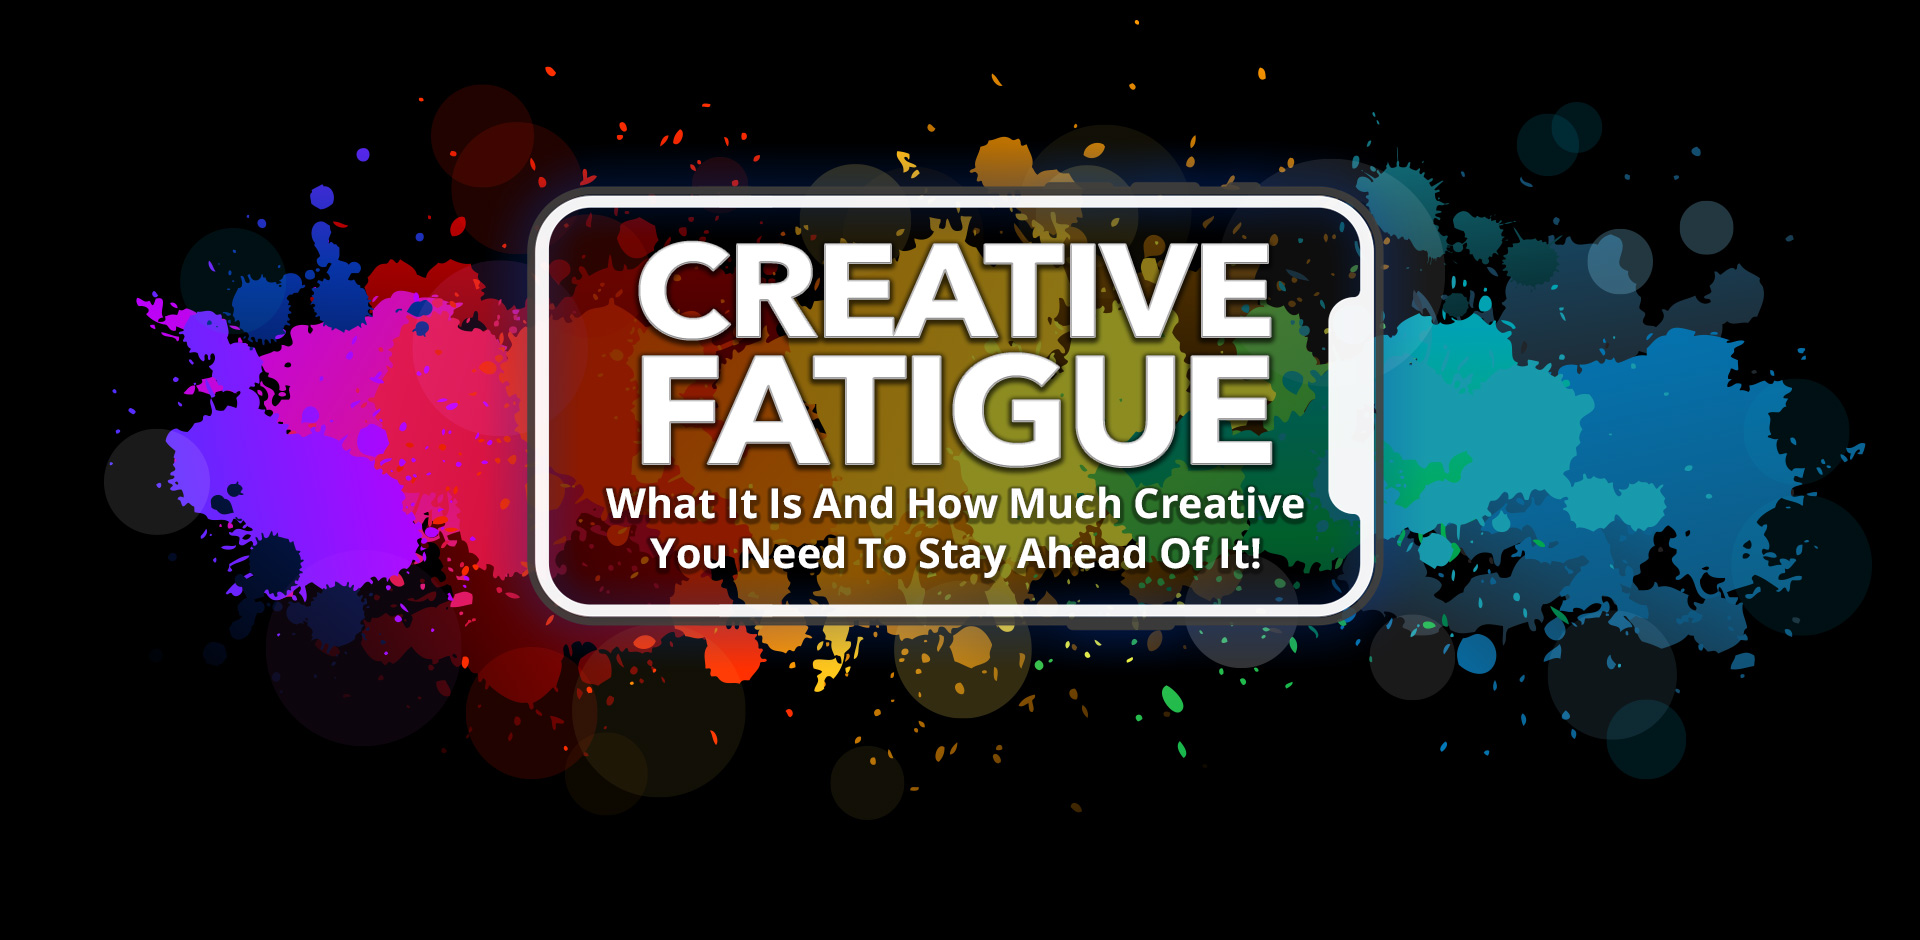 Creative Fatigue: What Is It And How Much Creative You Need To Stay Ahead of It